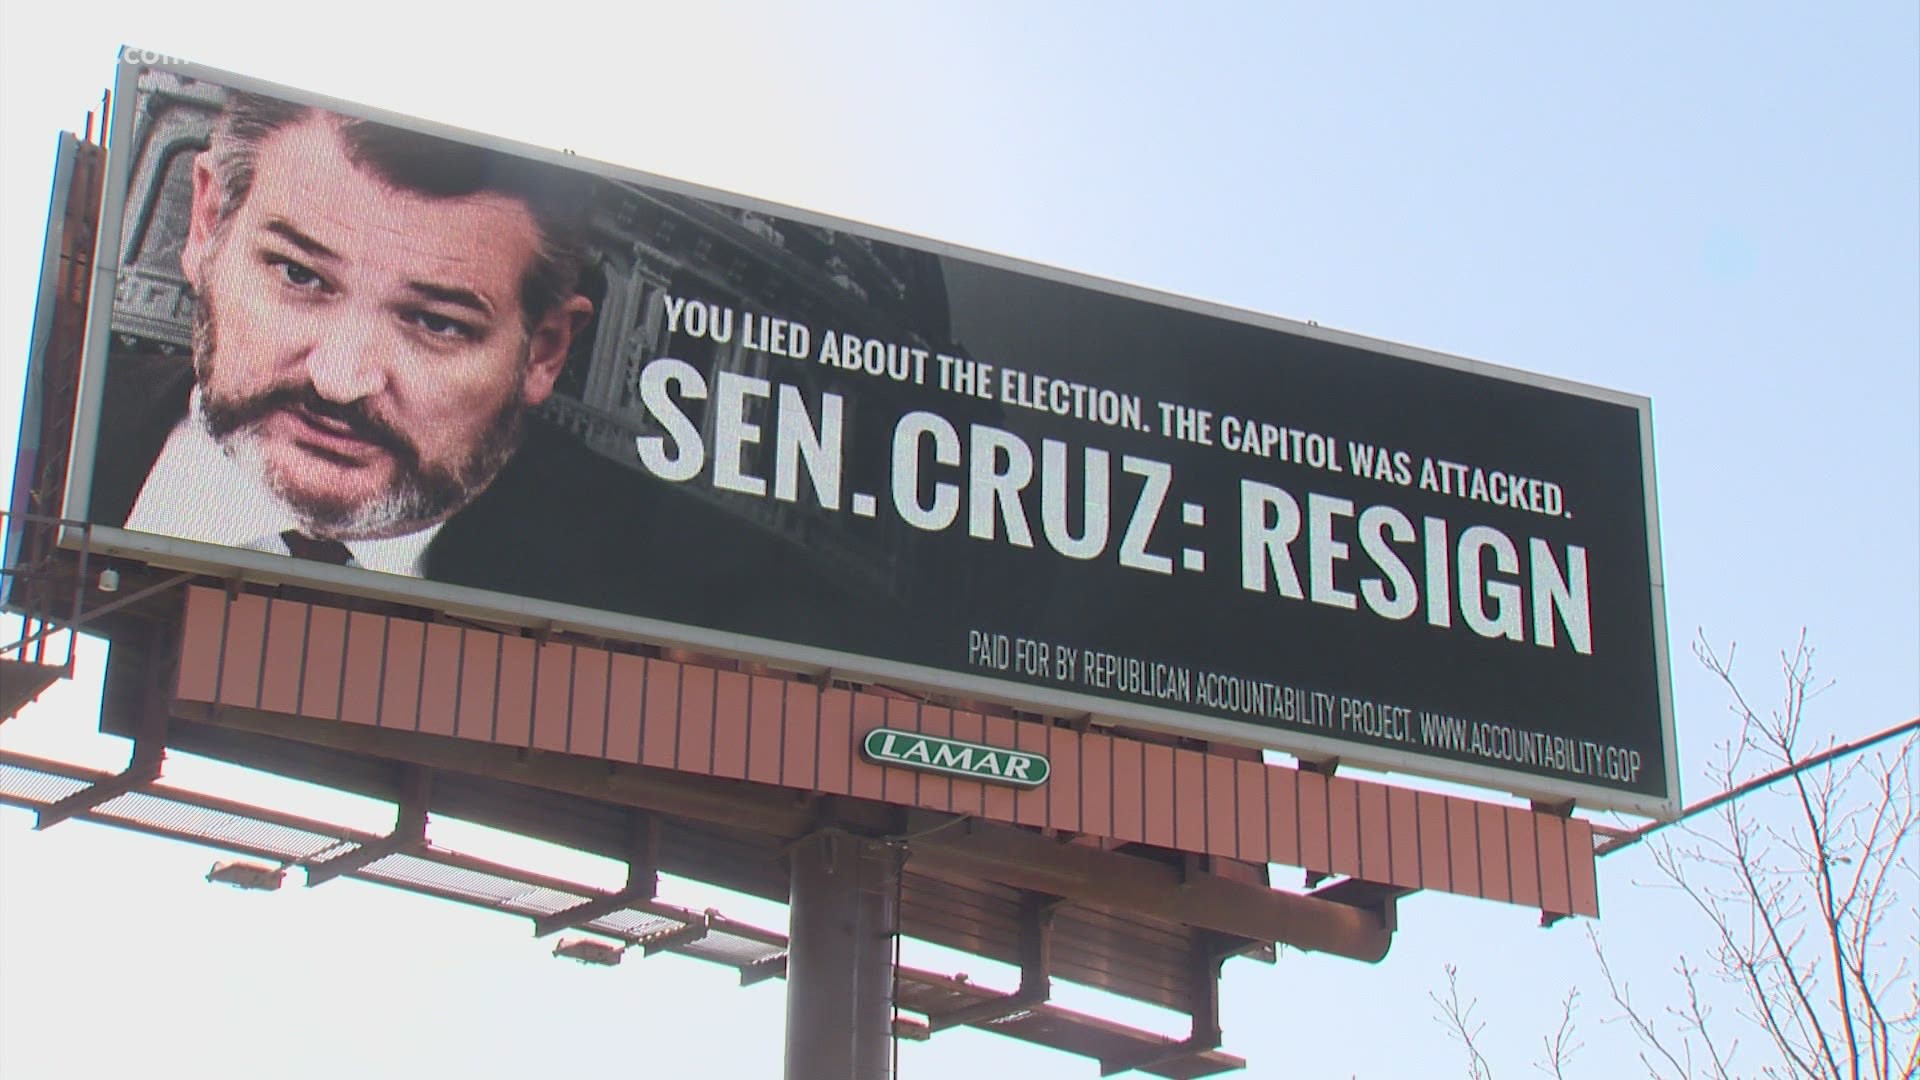 Billboard from Republican Accountability Project